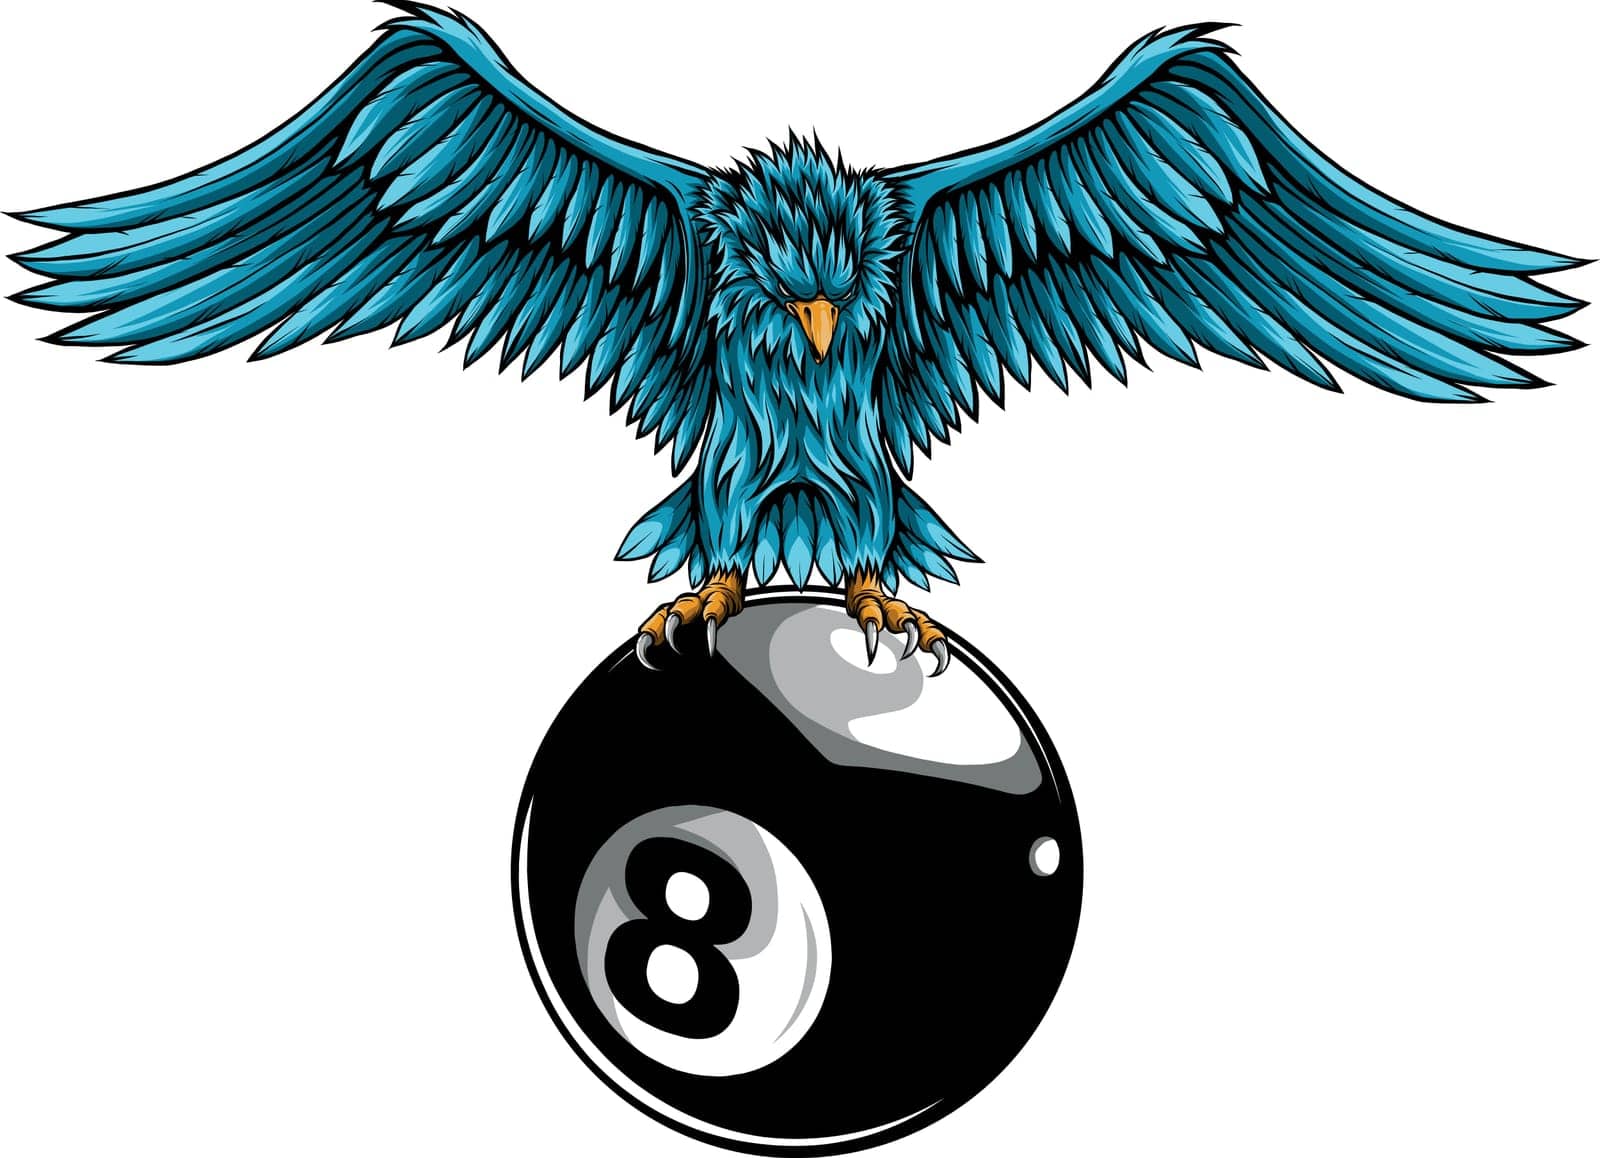 vector illustration of eagle with billiard 8 ball by dean